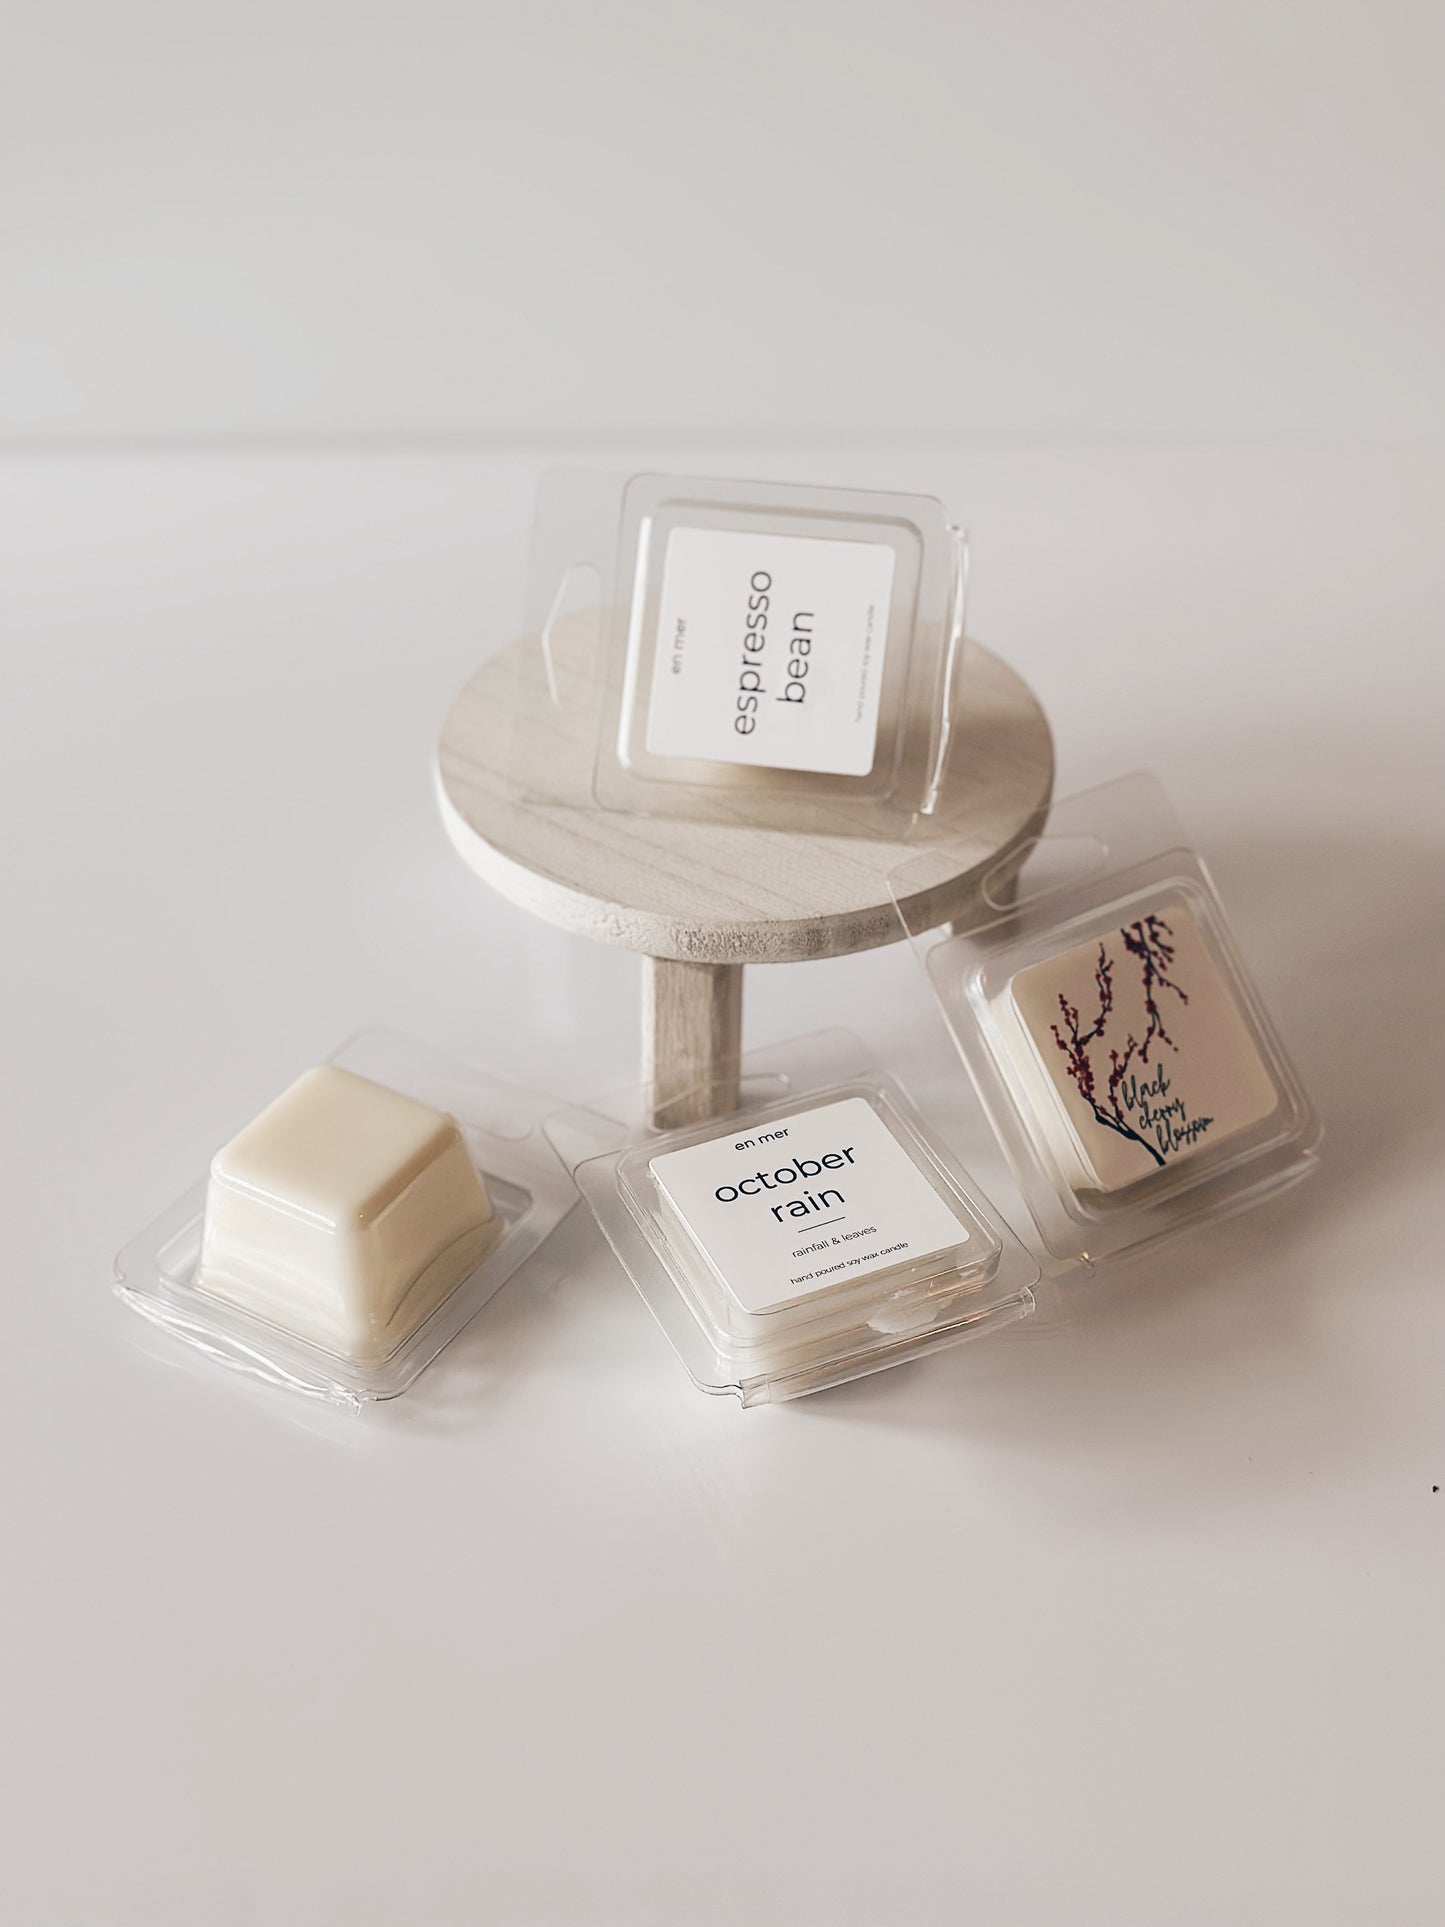 en mer | the bookstore | soy wax candle & melts